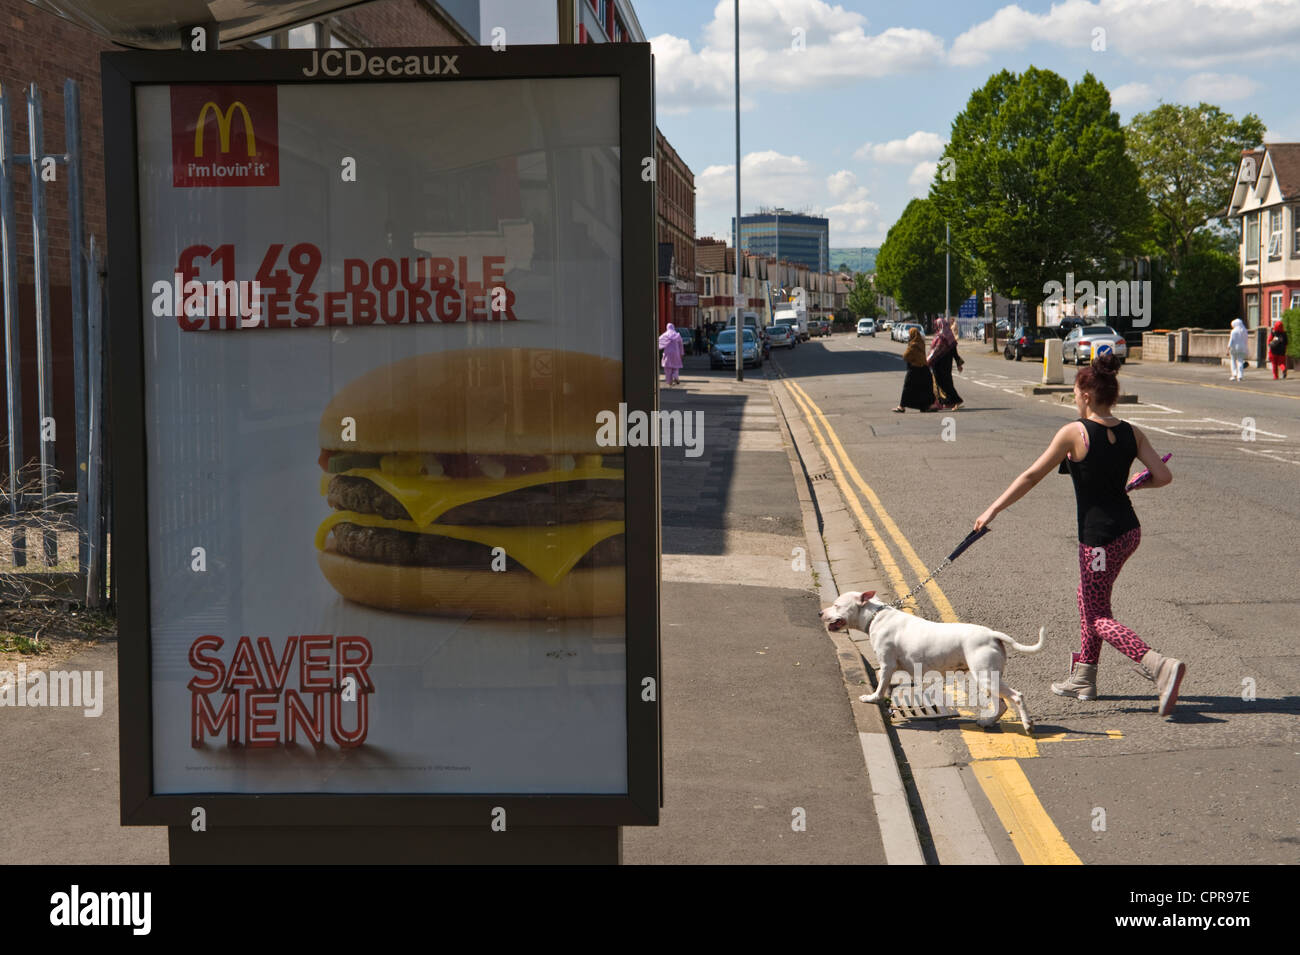 JCDecaux advertising billboard for MCDONALD'S DOUBLE CHEESEBURGER on bus shelter in Newport South Wales UK Stock Photo